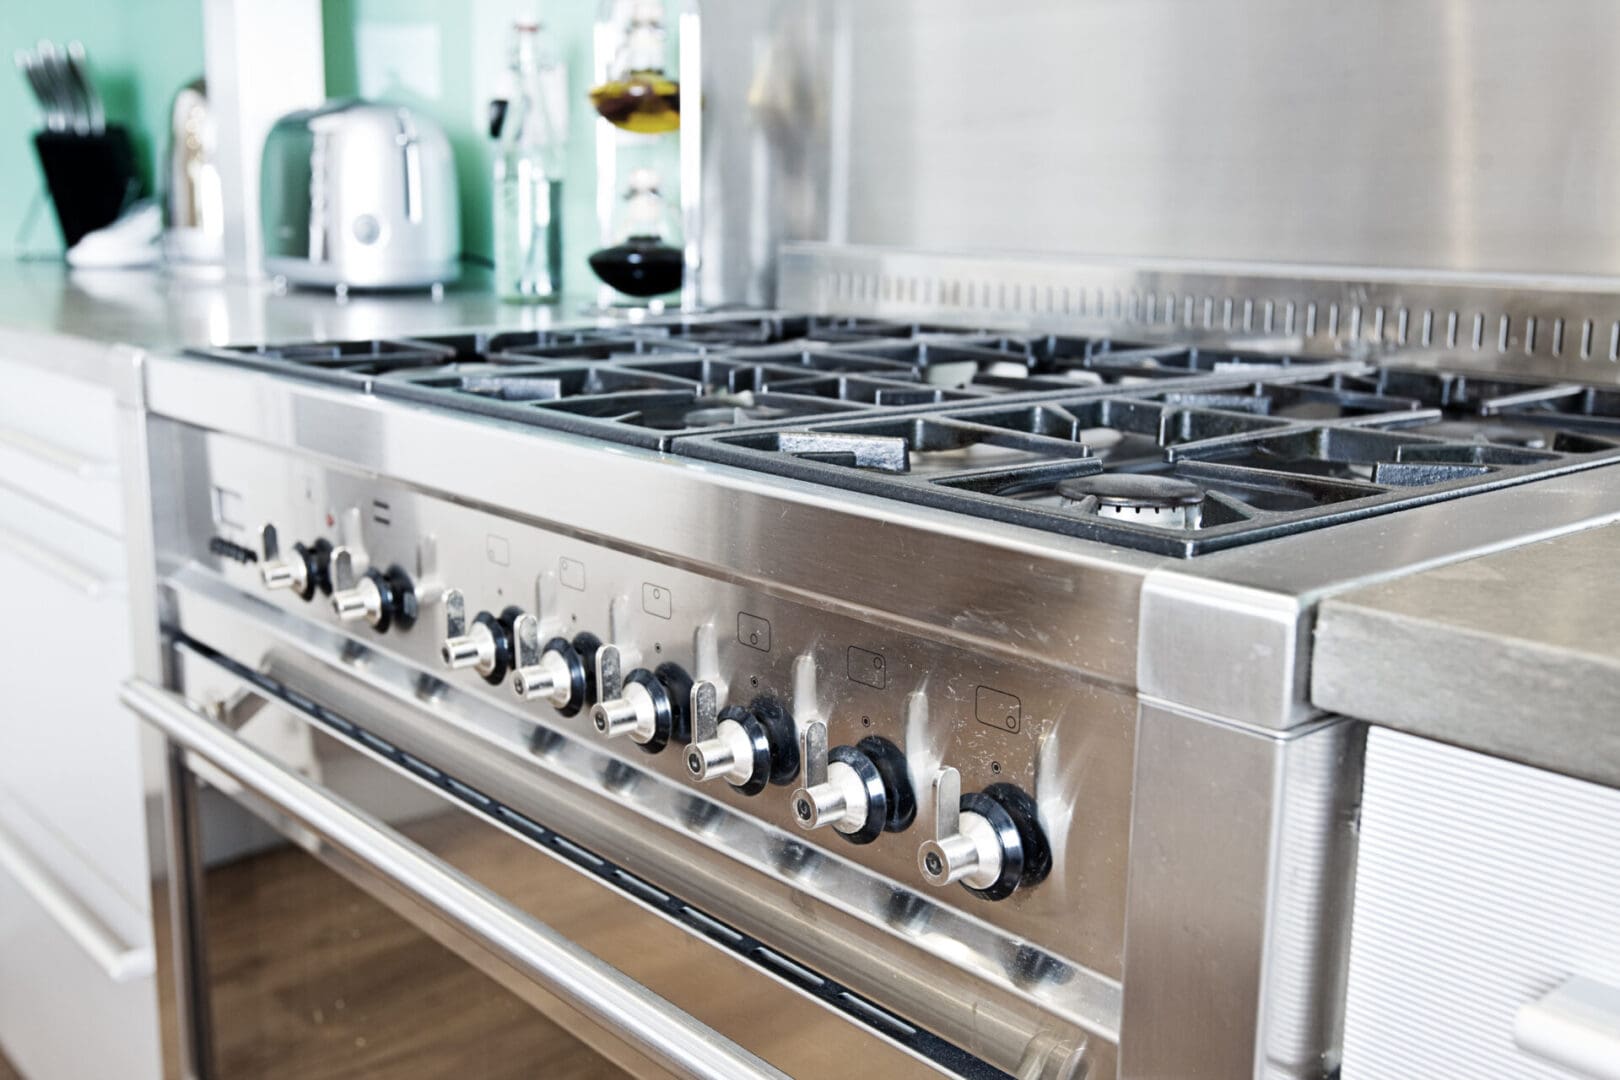 A large stainless steel stove with black knobs.